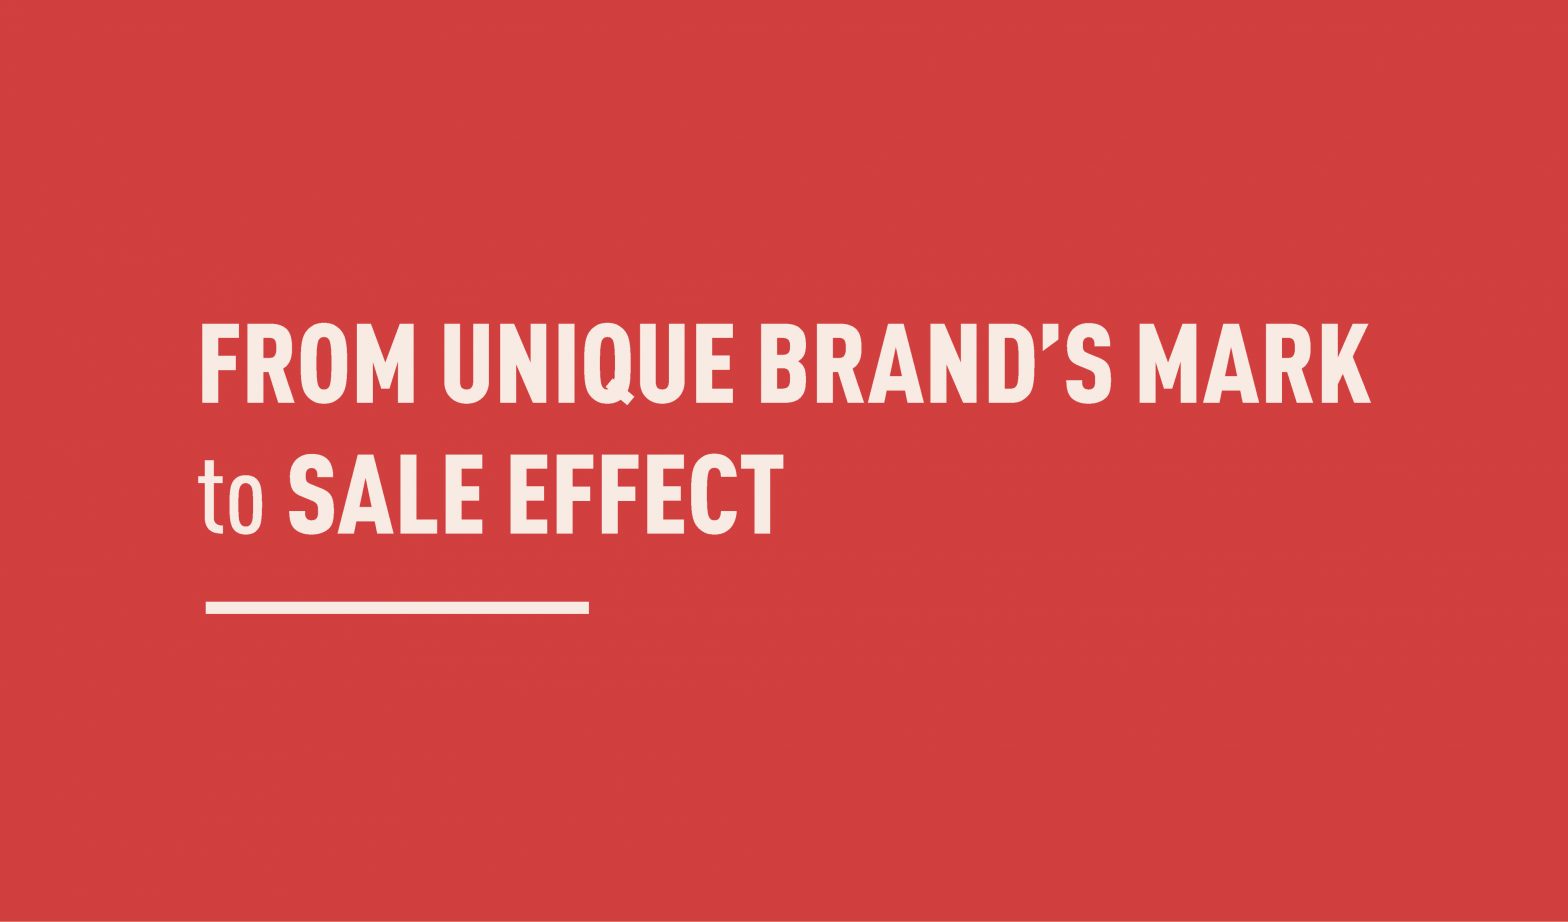 FROM UNIQUE BRAND’S MARK TO SALES EFFECT